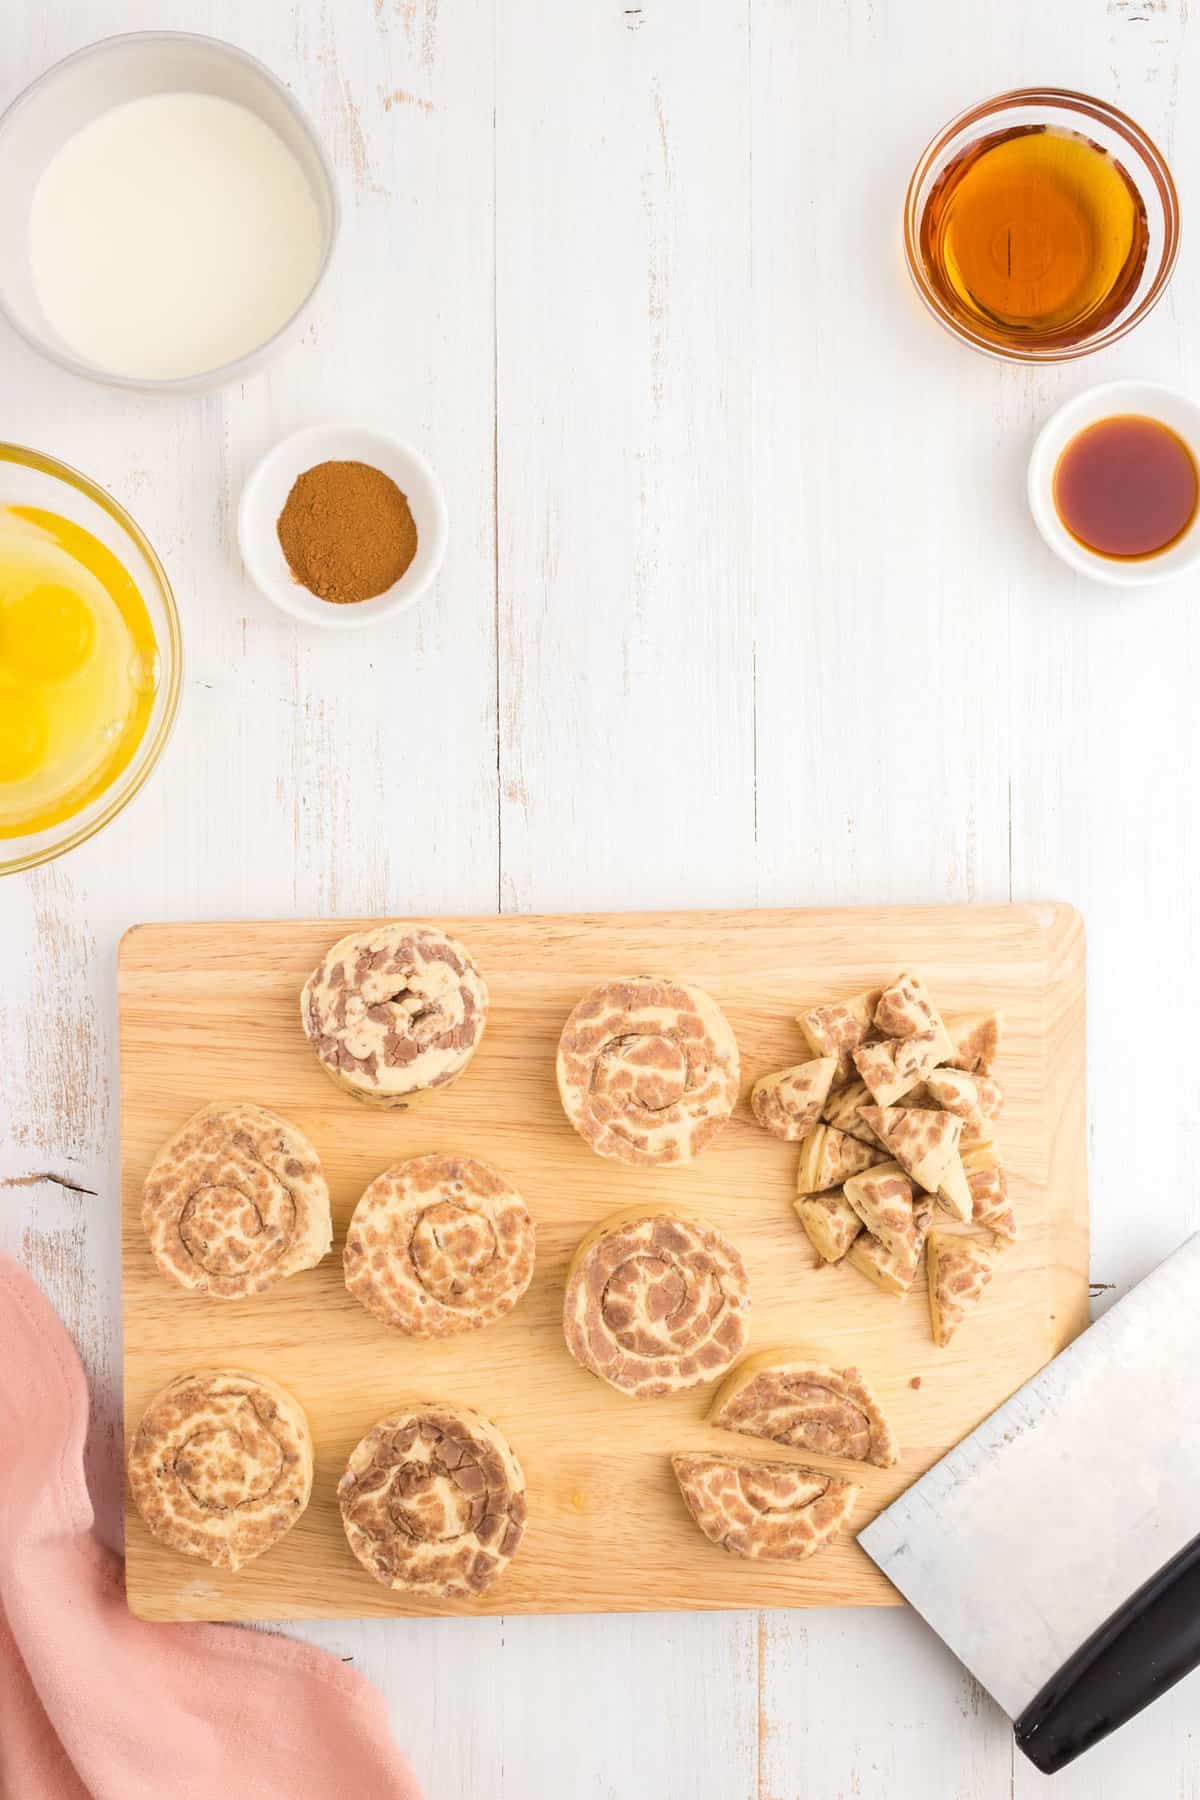 Placing Pillsbury Cinnamon Roll discs on cutting board and cutting into pieces for Cinnamon Roll Casserole recipe